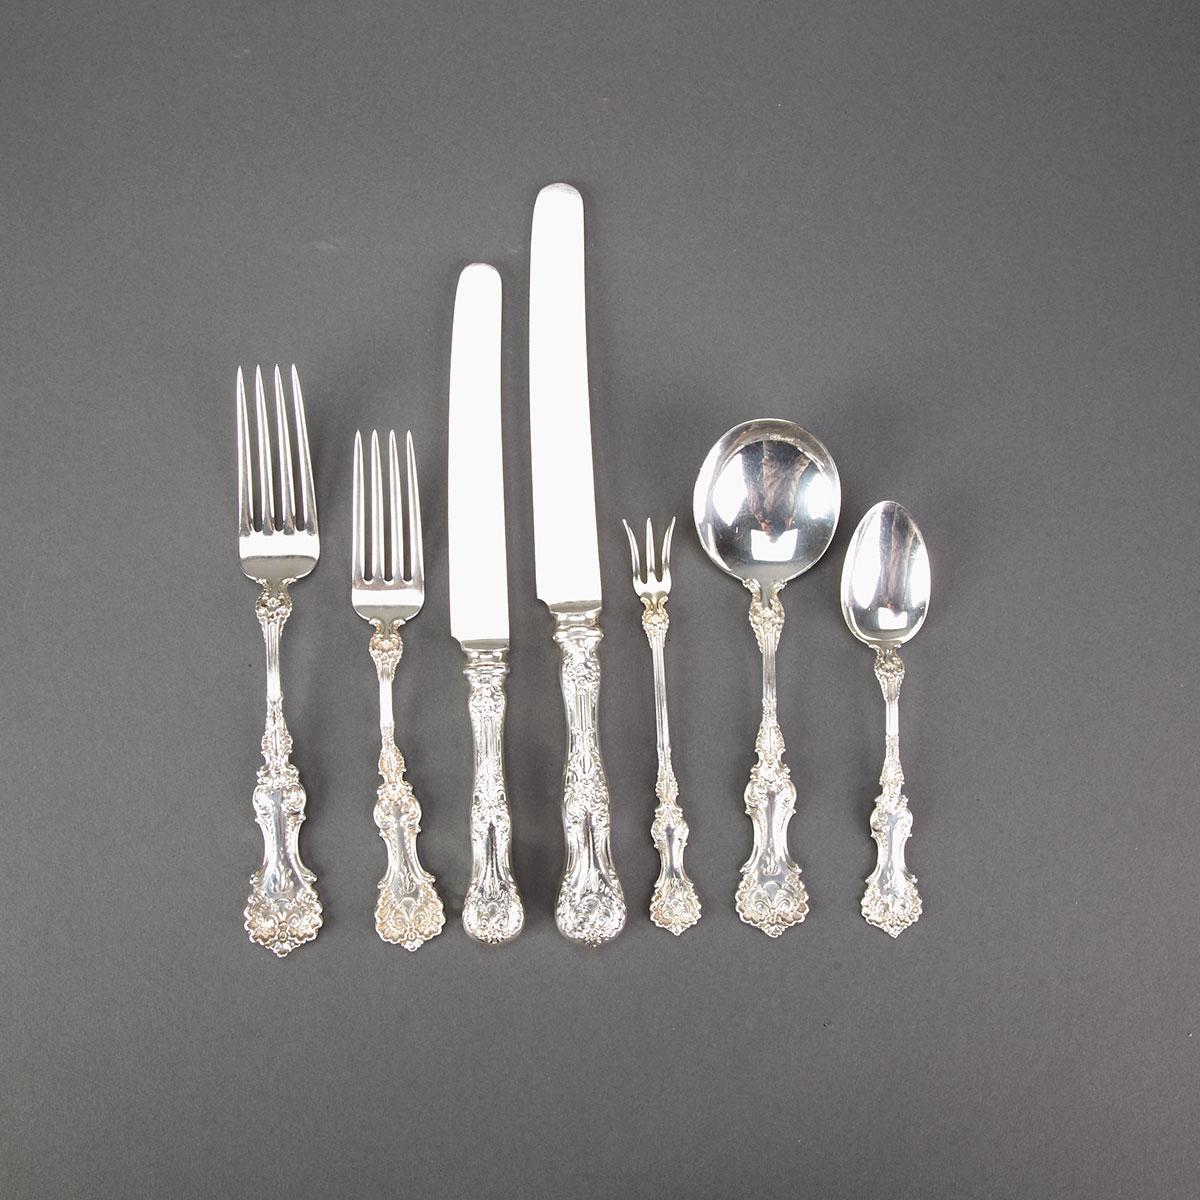 American Silver ‘Pompadour’ Pattern Flatware Service, Whiting Mfg. Co., New York, N.Y., early 20th century